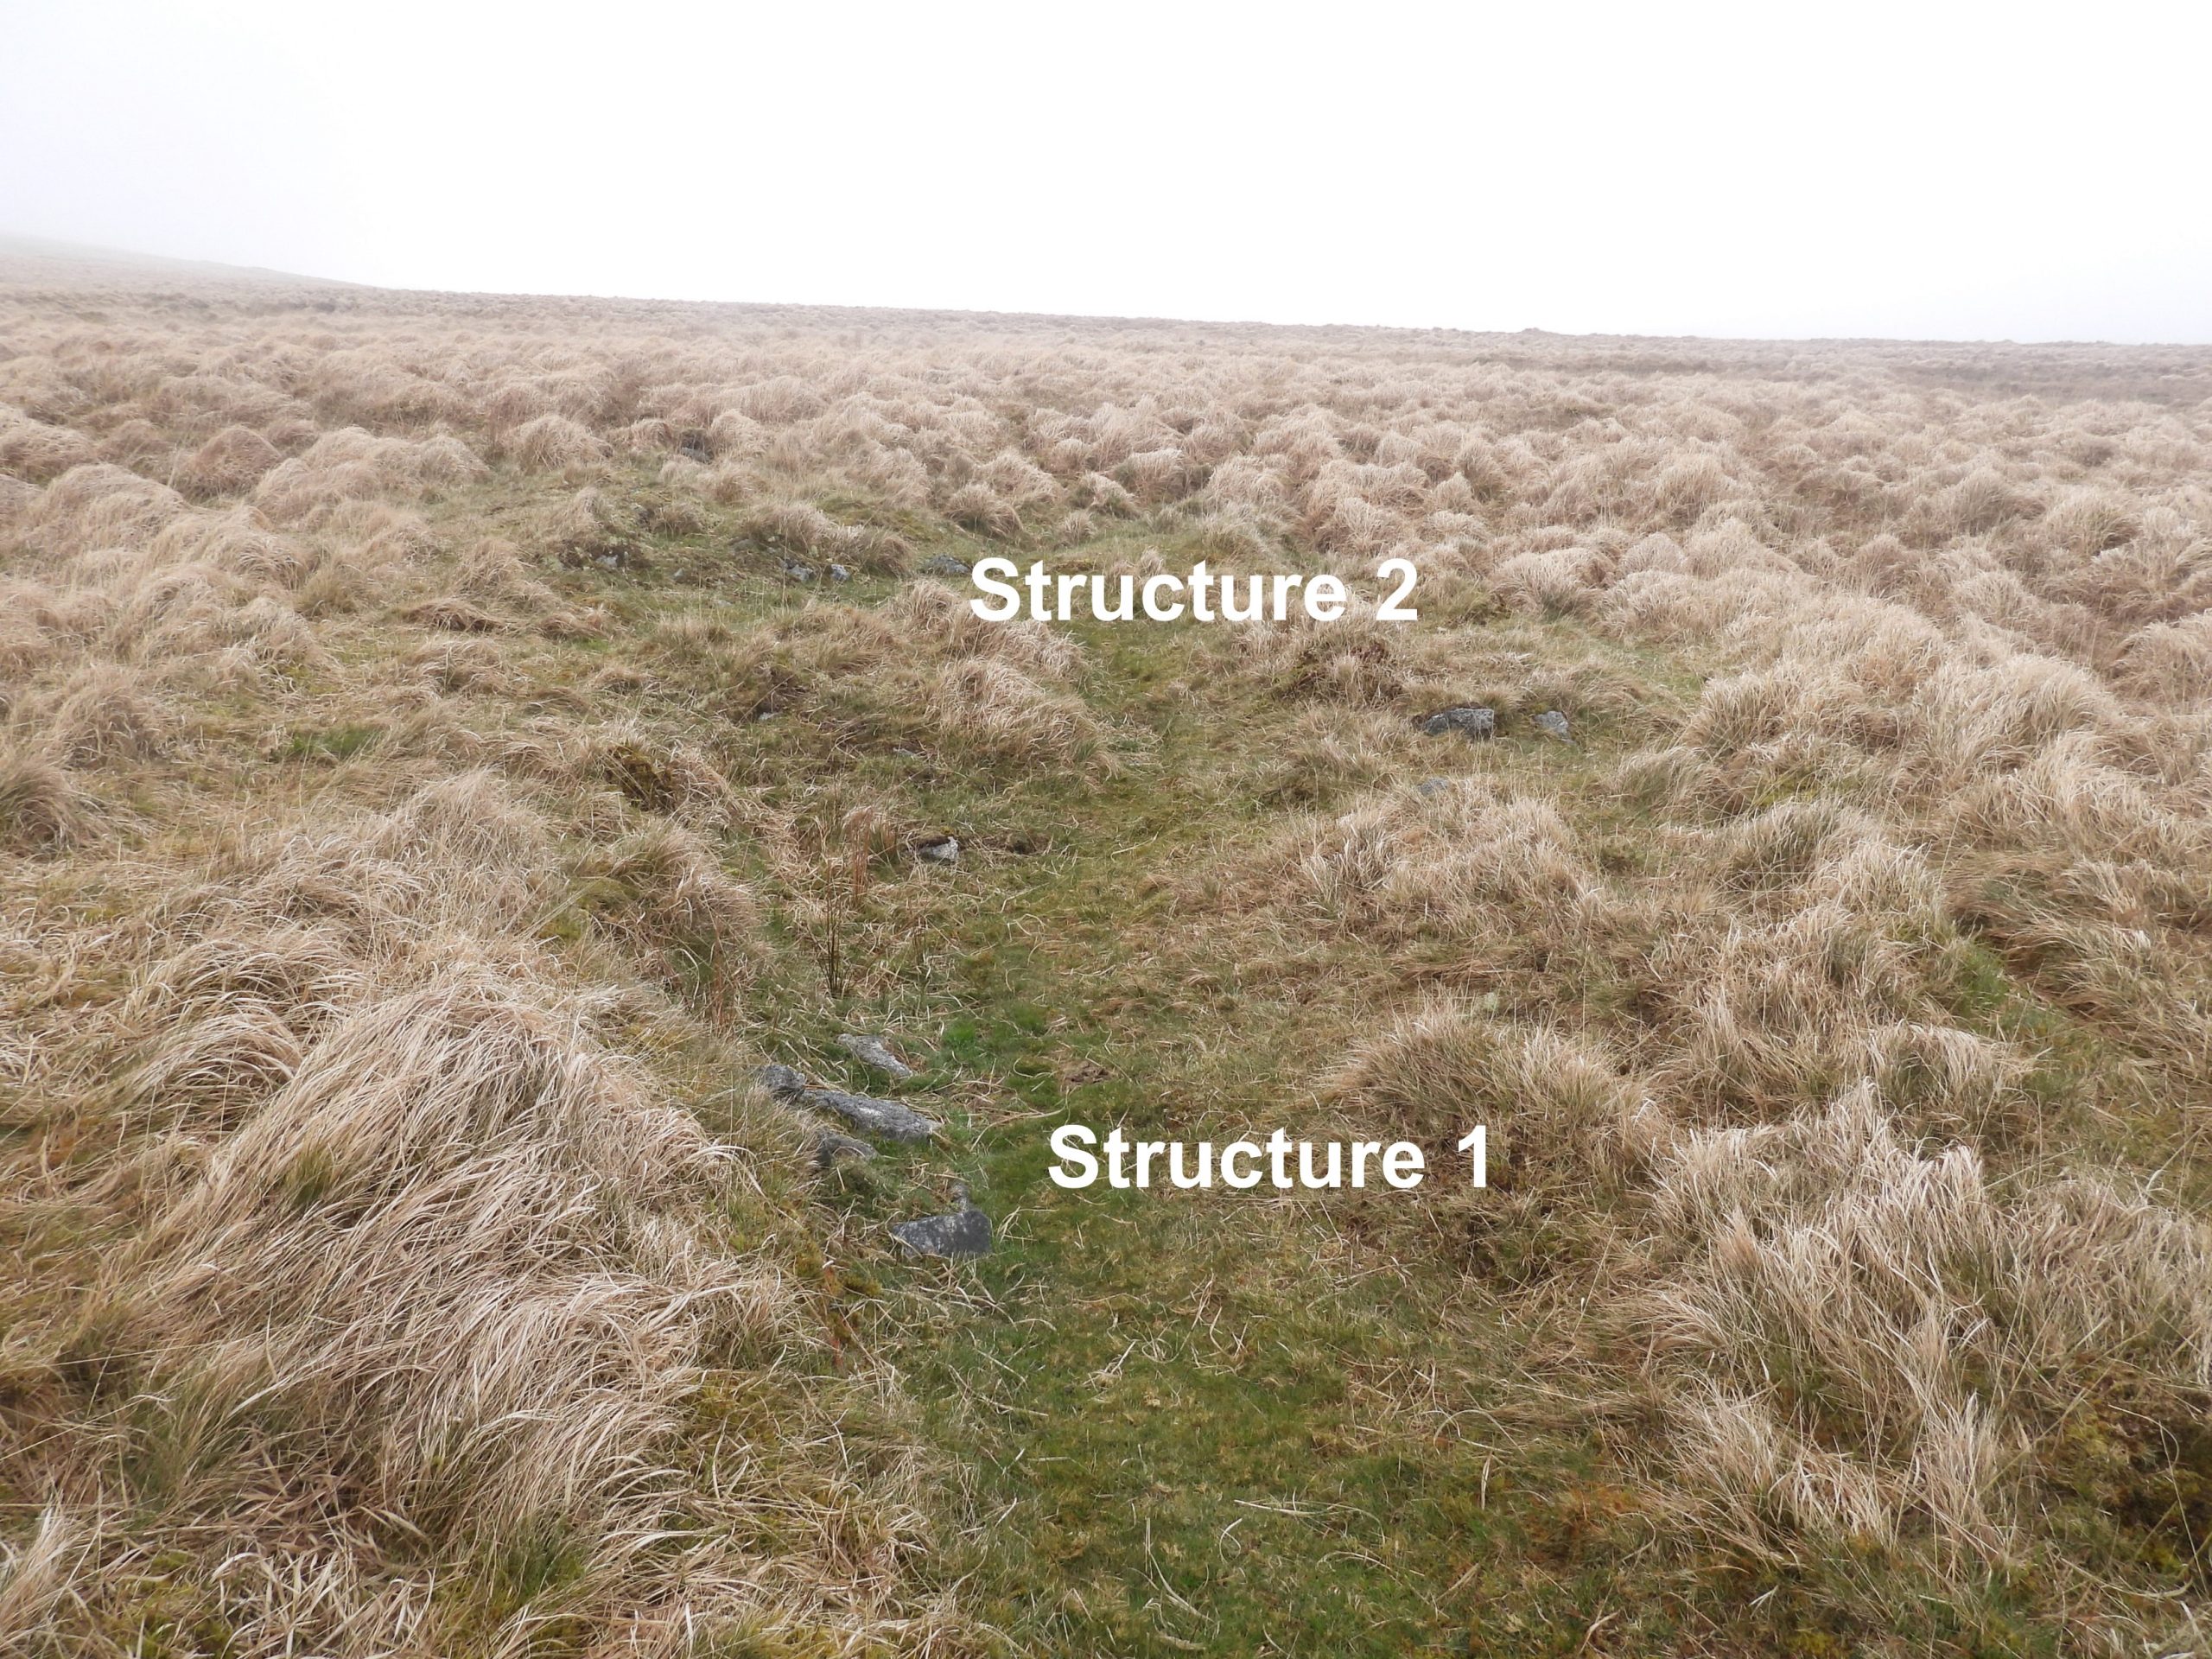 6. Structures a